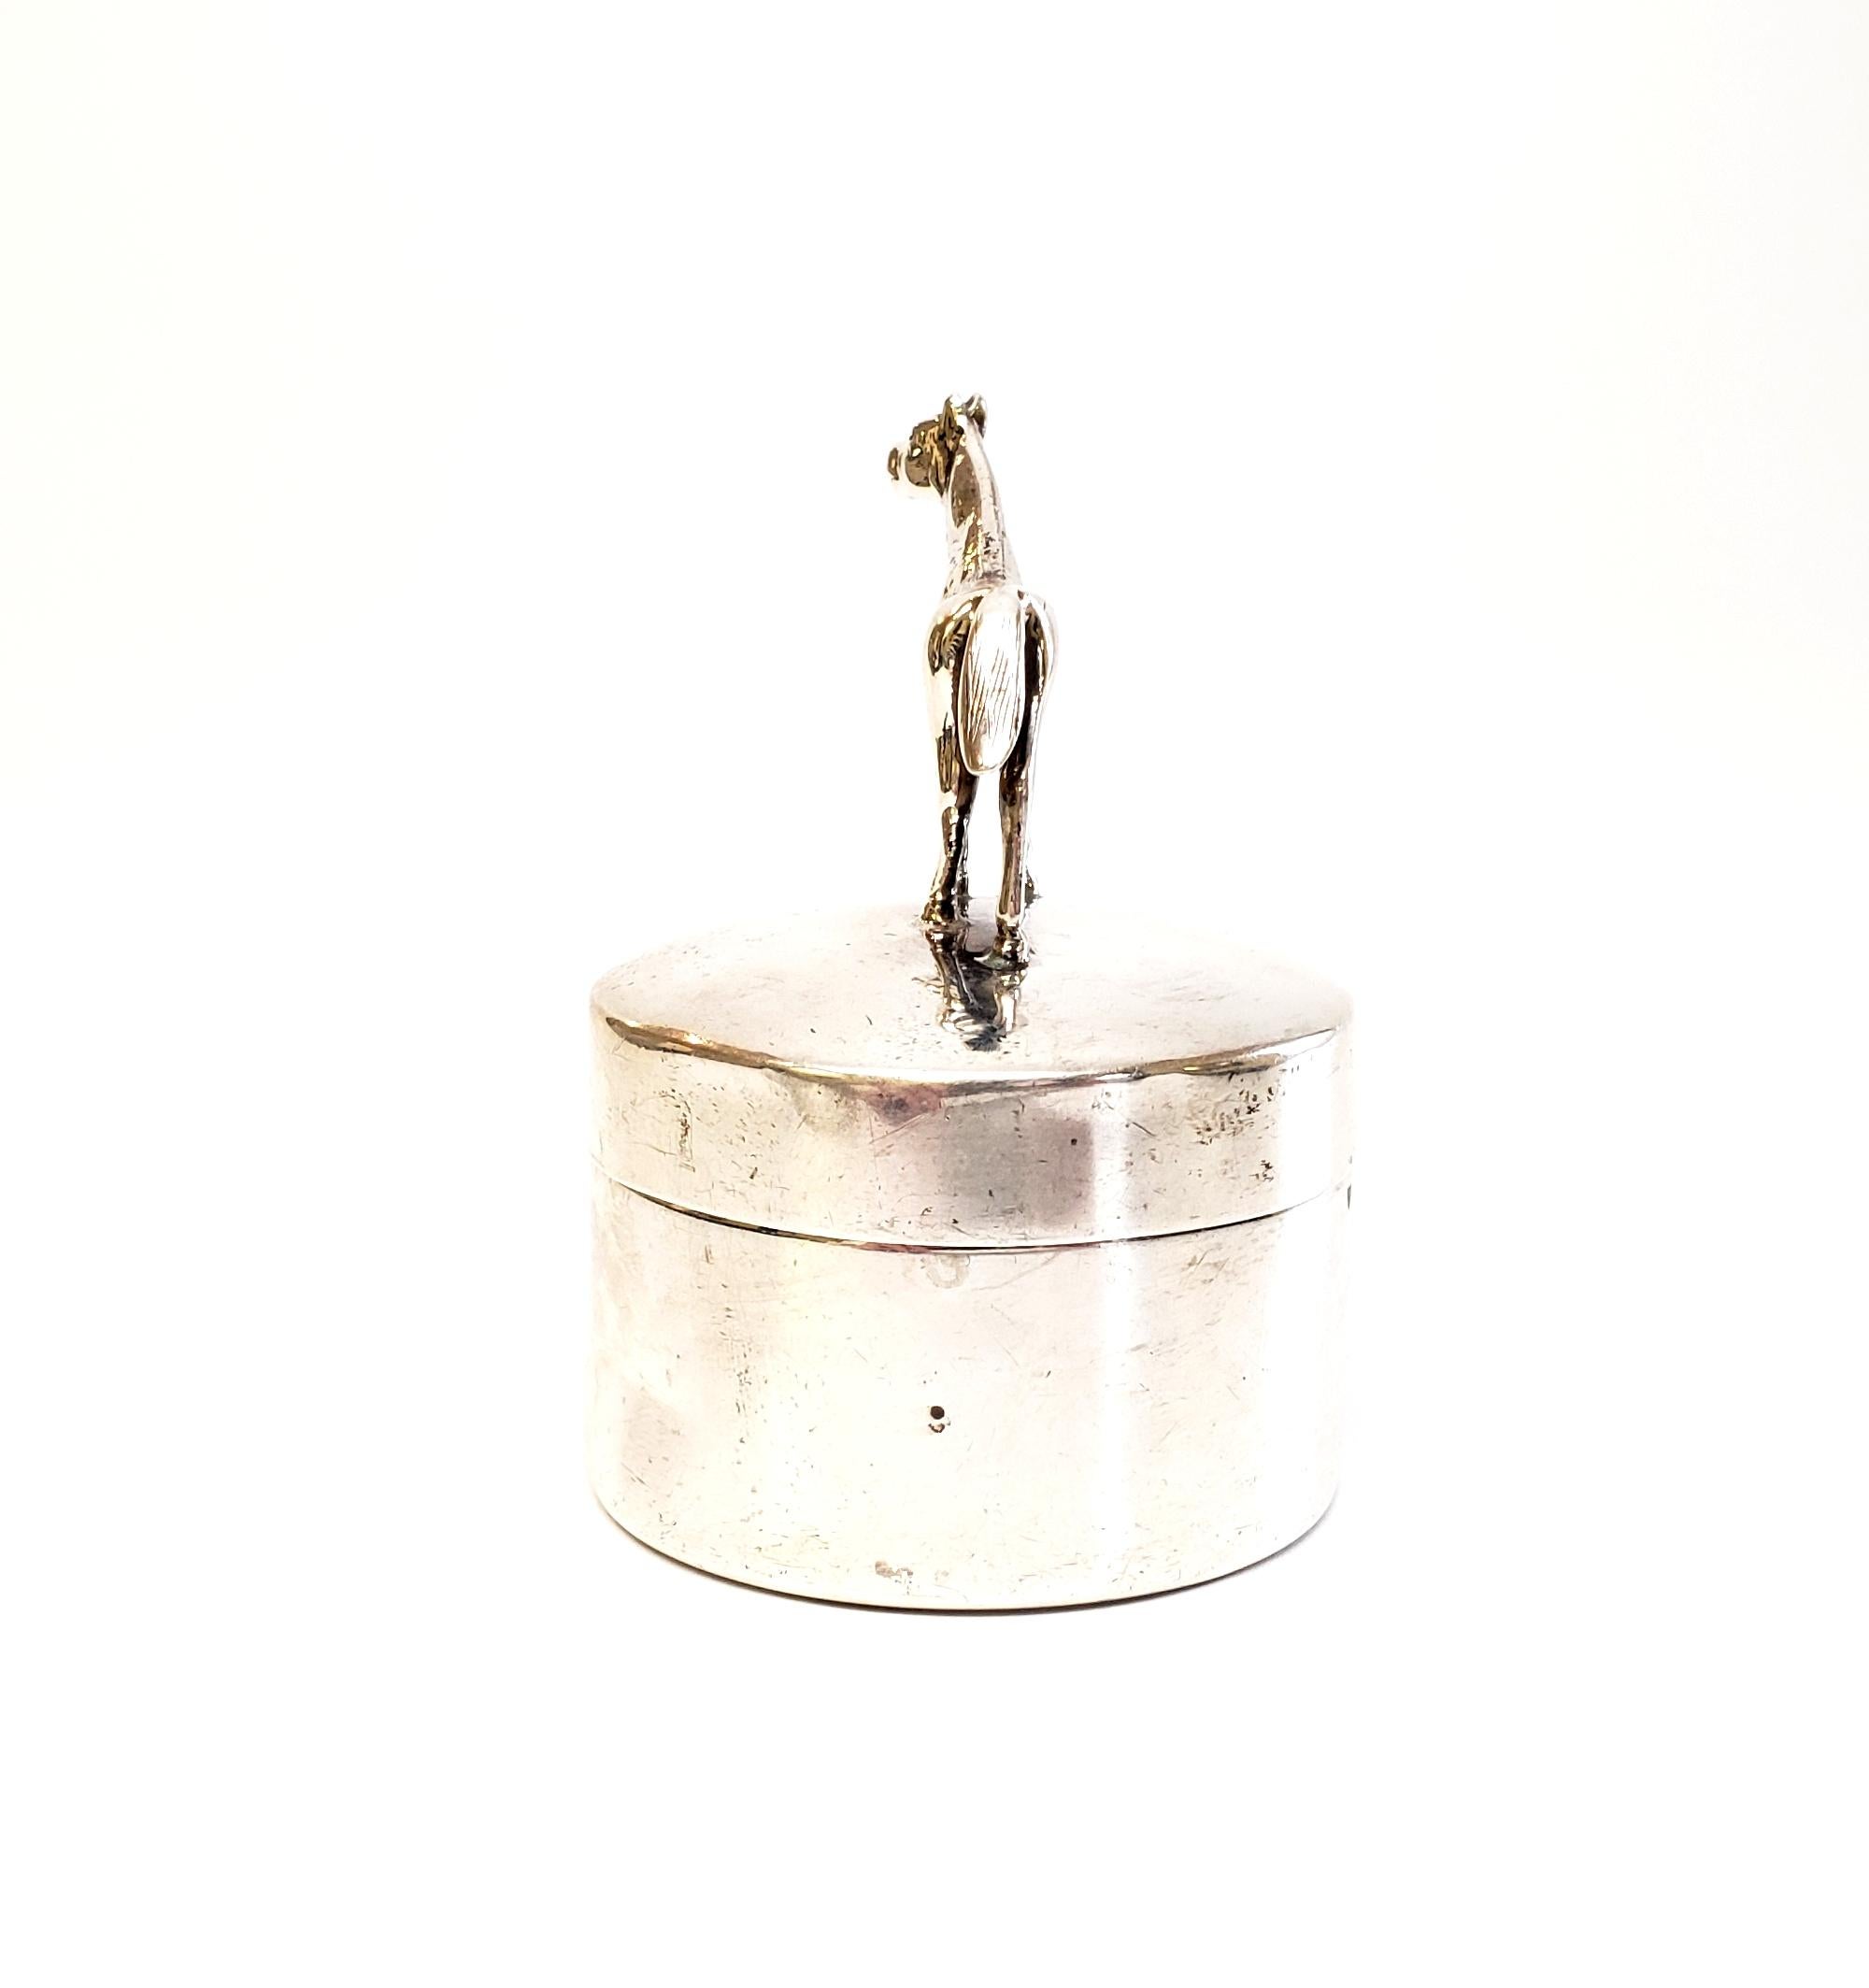 Antique sterling silver round box for postage stamps by Herbst & Wassall.

Featuring a figural horse and a gilt interior, this postage stamp box was designed by Herbst & Wassall, 1909-1940. Stamps can be dispensed from a roll thru the vertical